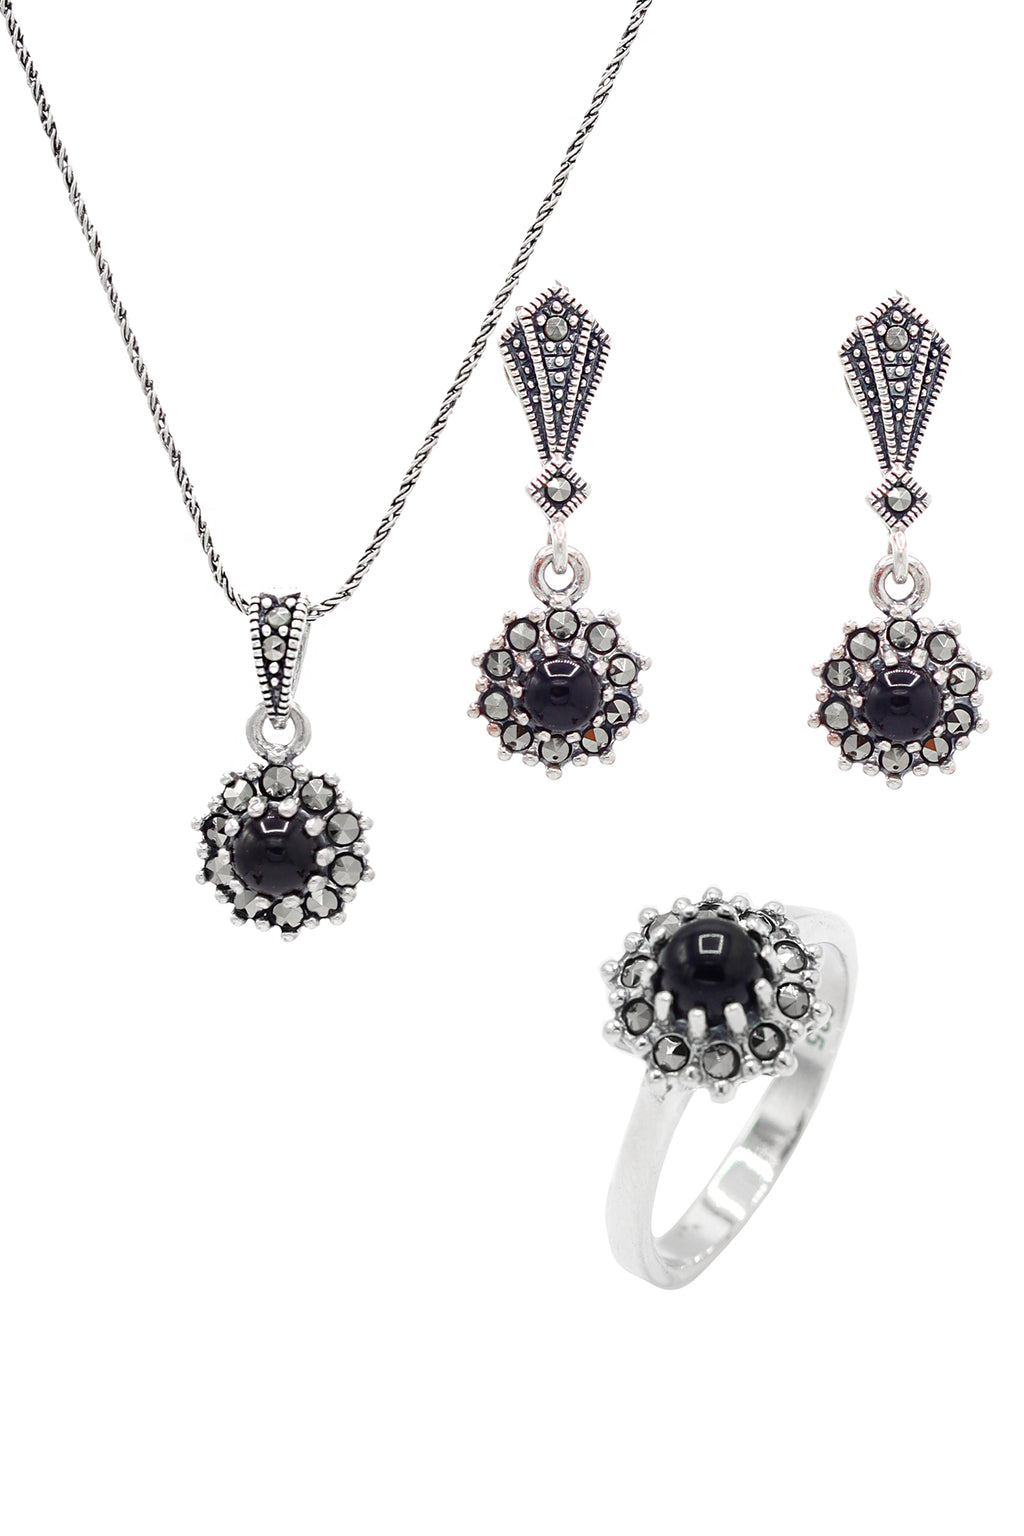 Floral Model Silver Triple Jewelry Set With Onyx (NG201021956)